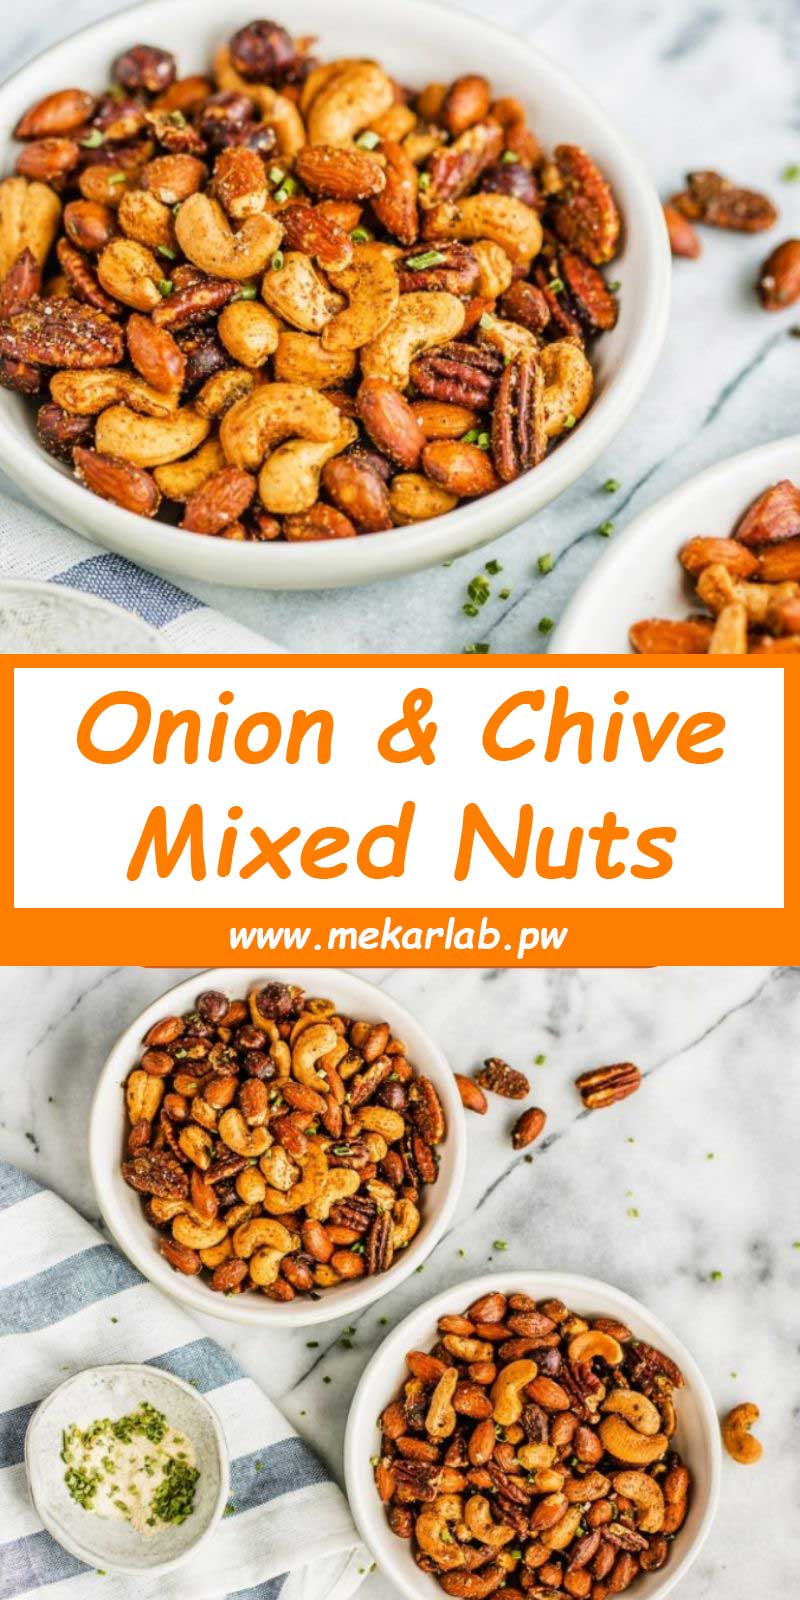 Onion & Chive Mixed Nuts